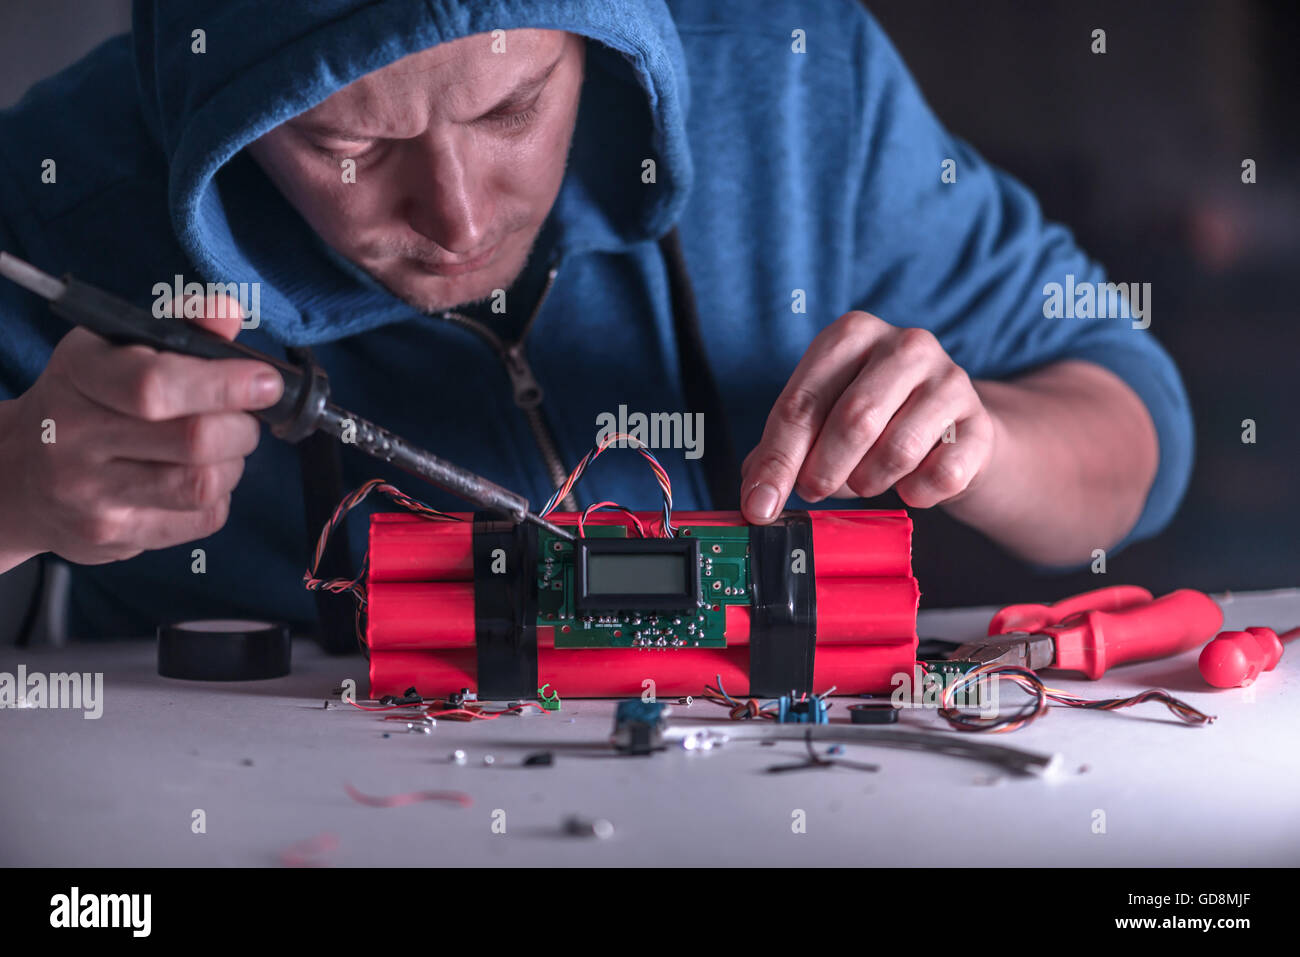 making bomb with digital timer Stock Photo